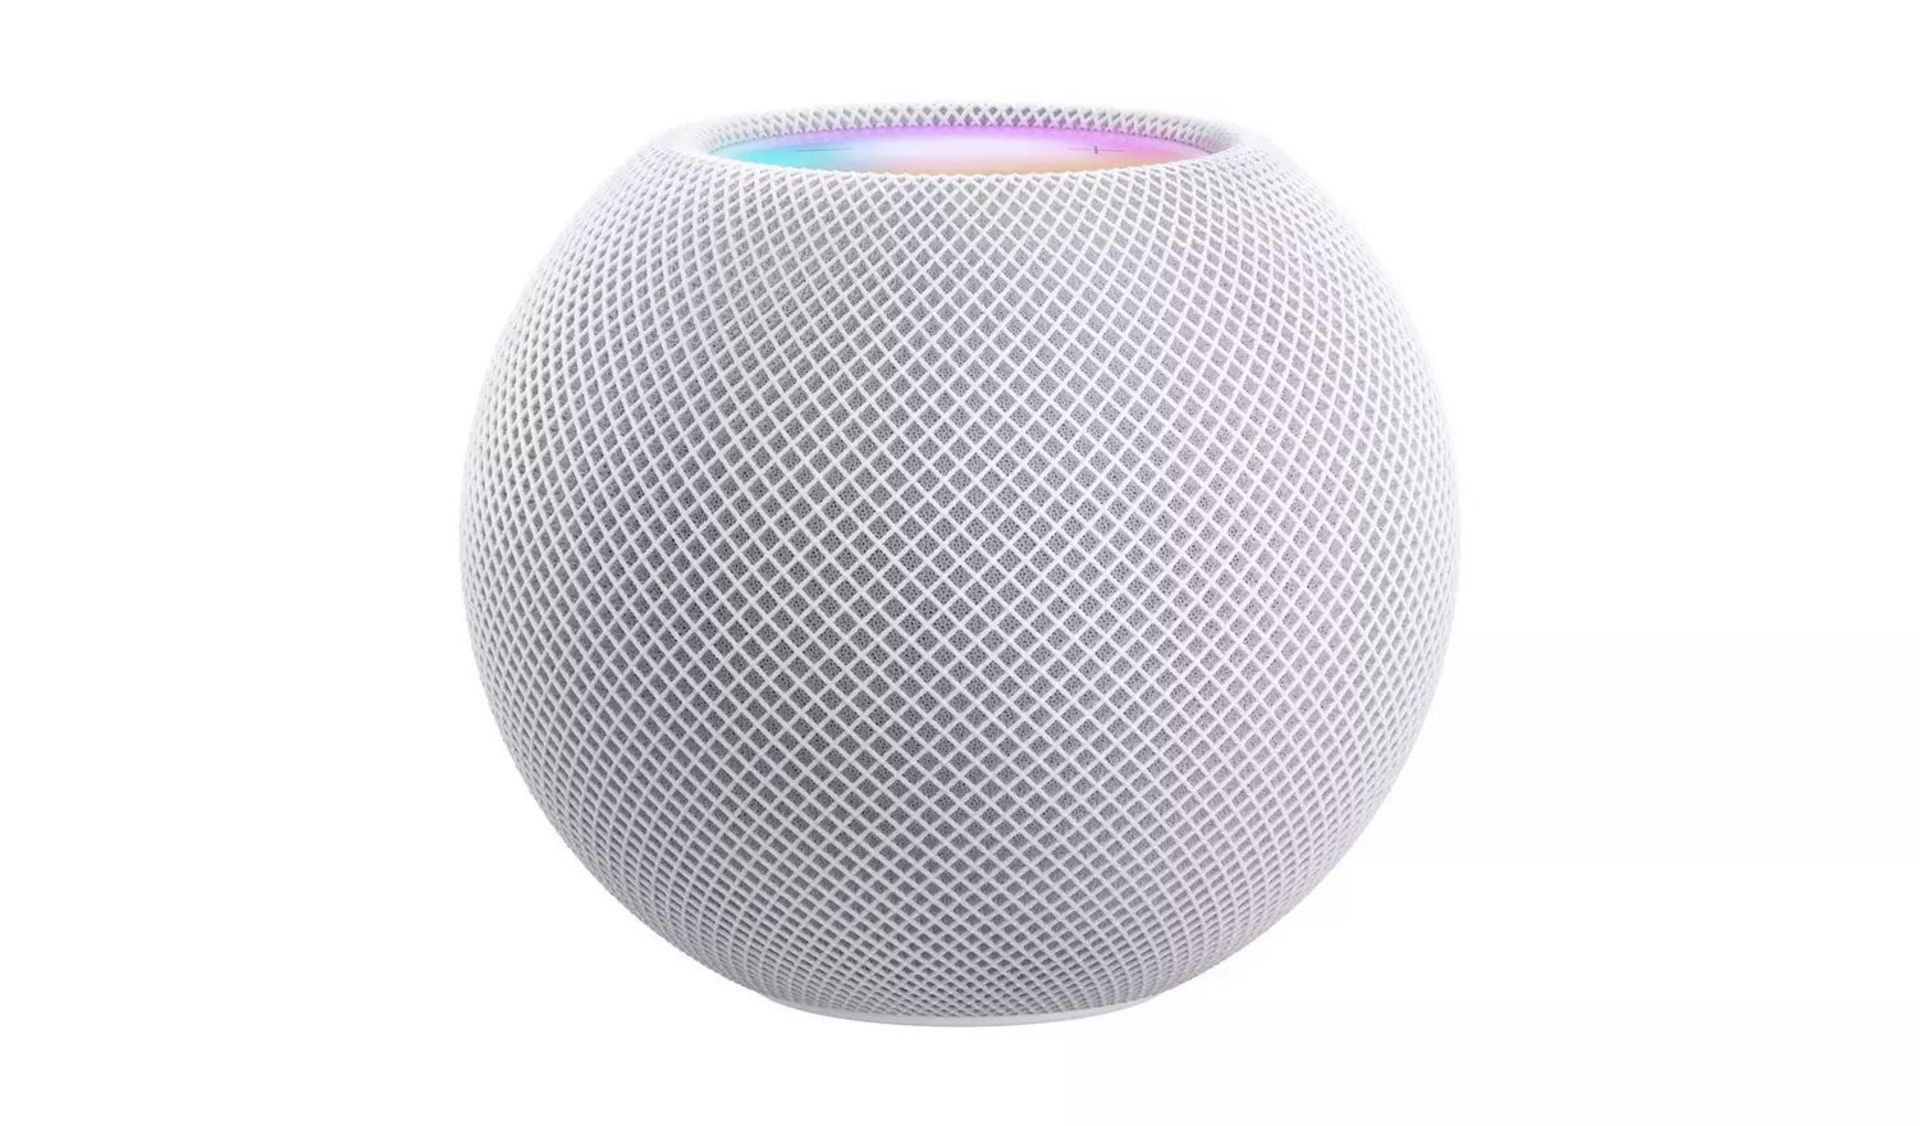 BRAND NEW FACTORY SEALED APPLE HomePod mini - White. RRP £99.99. The Apple HomePod mini delivers